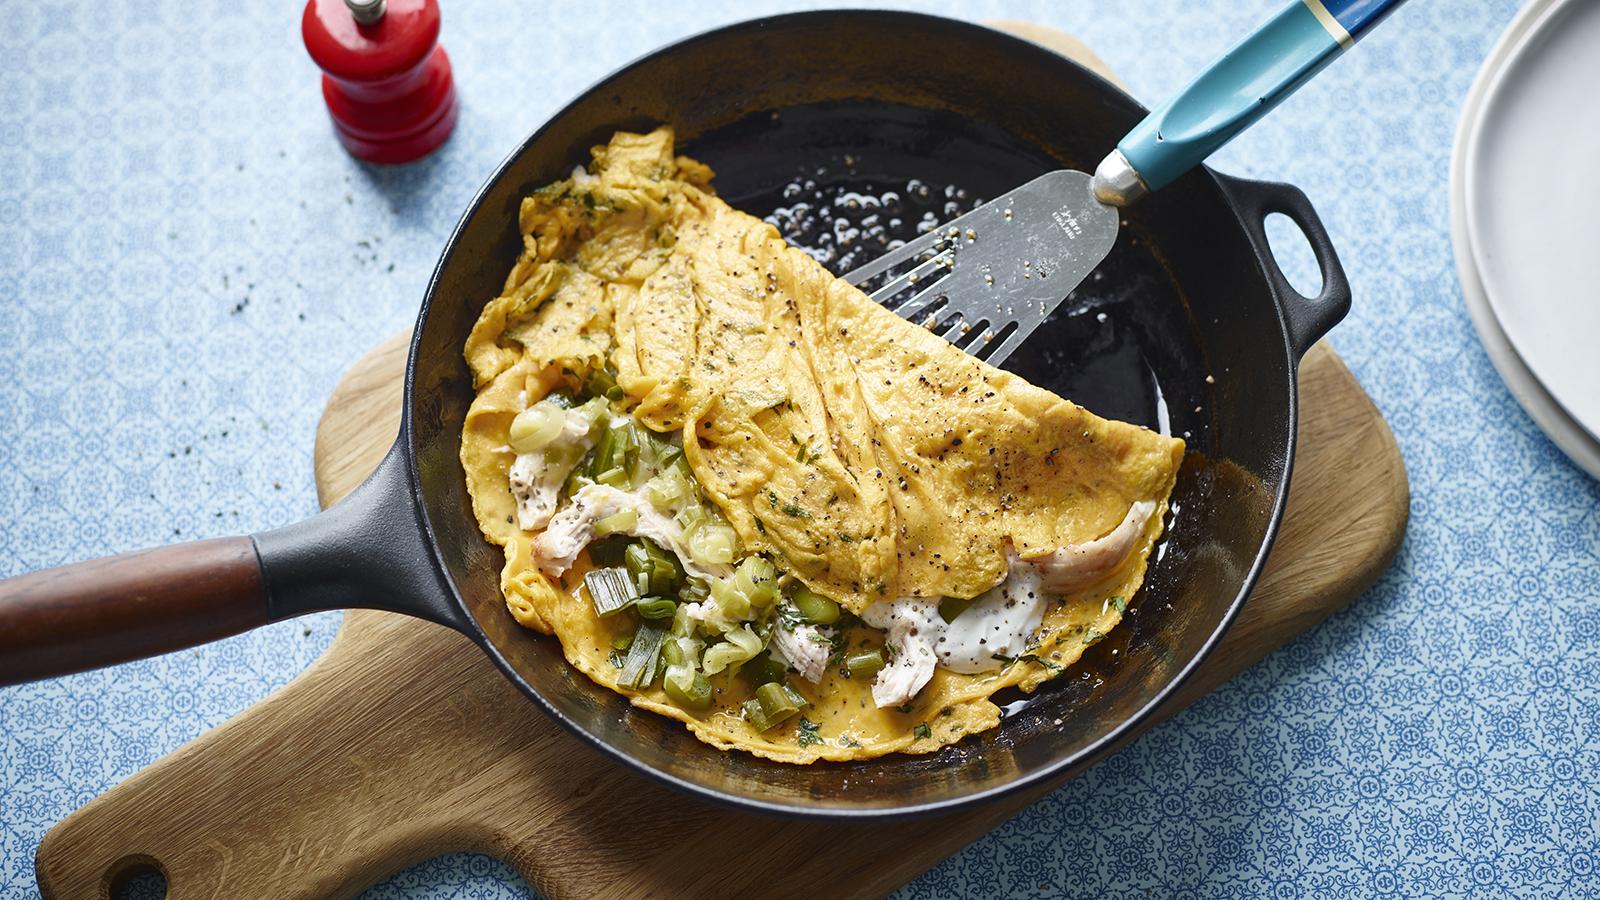 Chicken and tarragon omelette